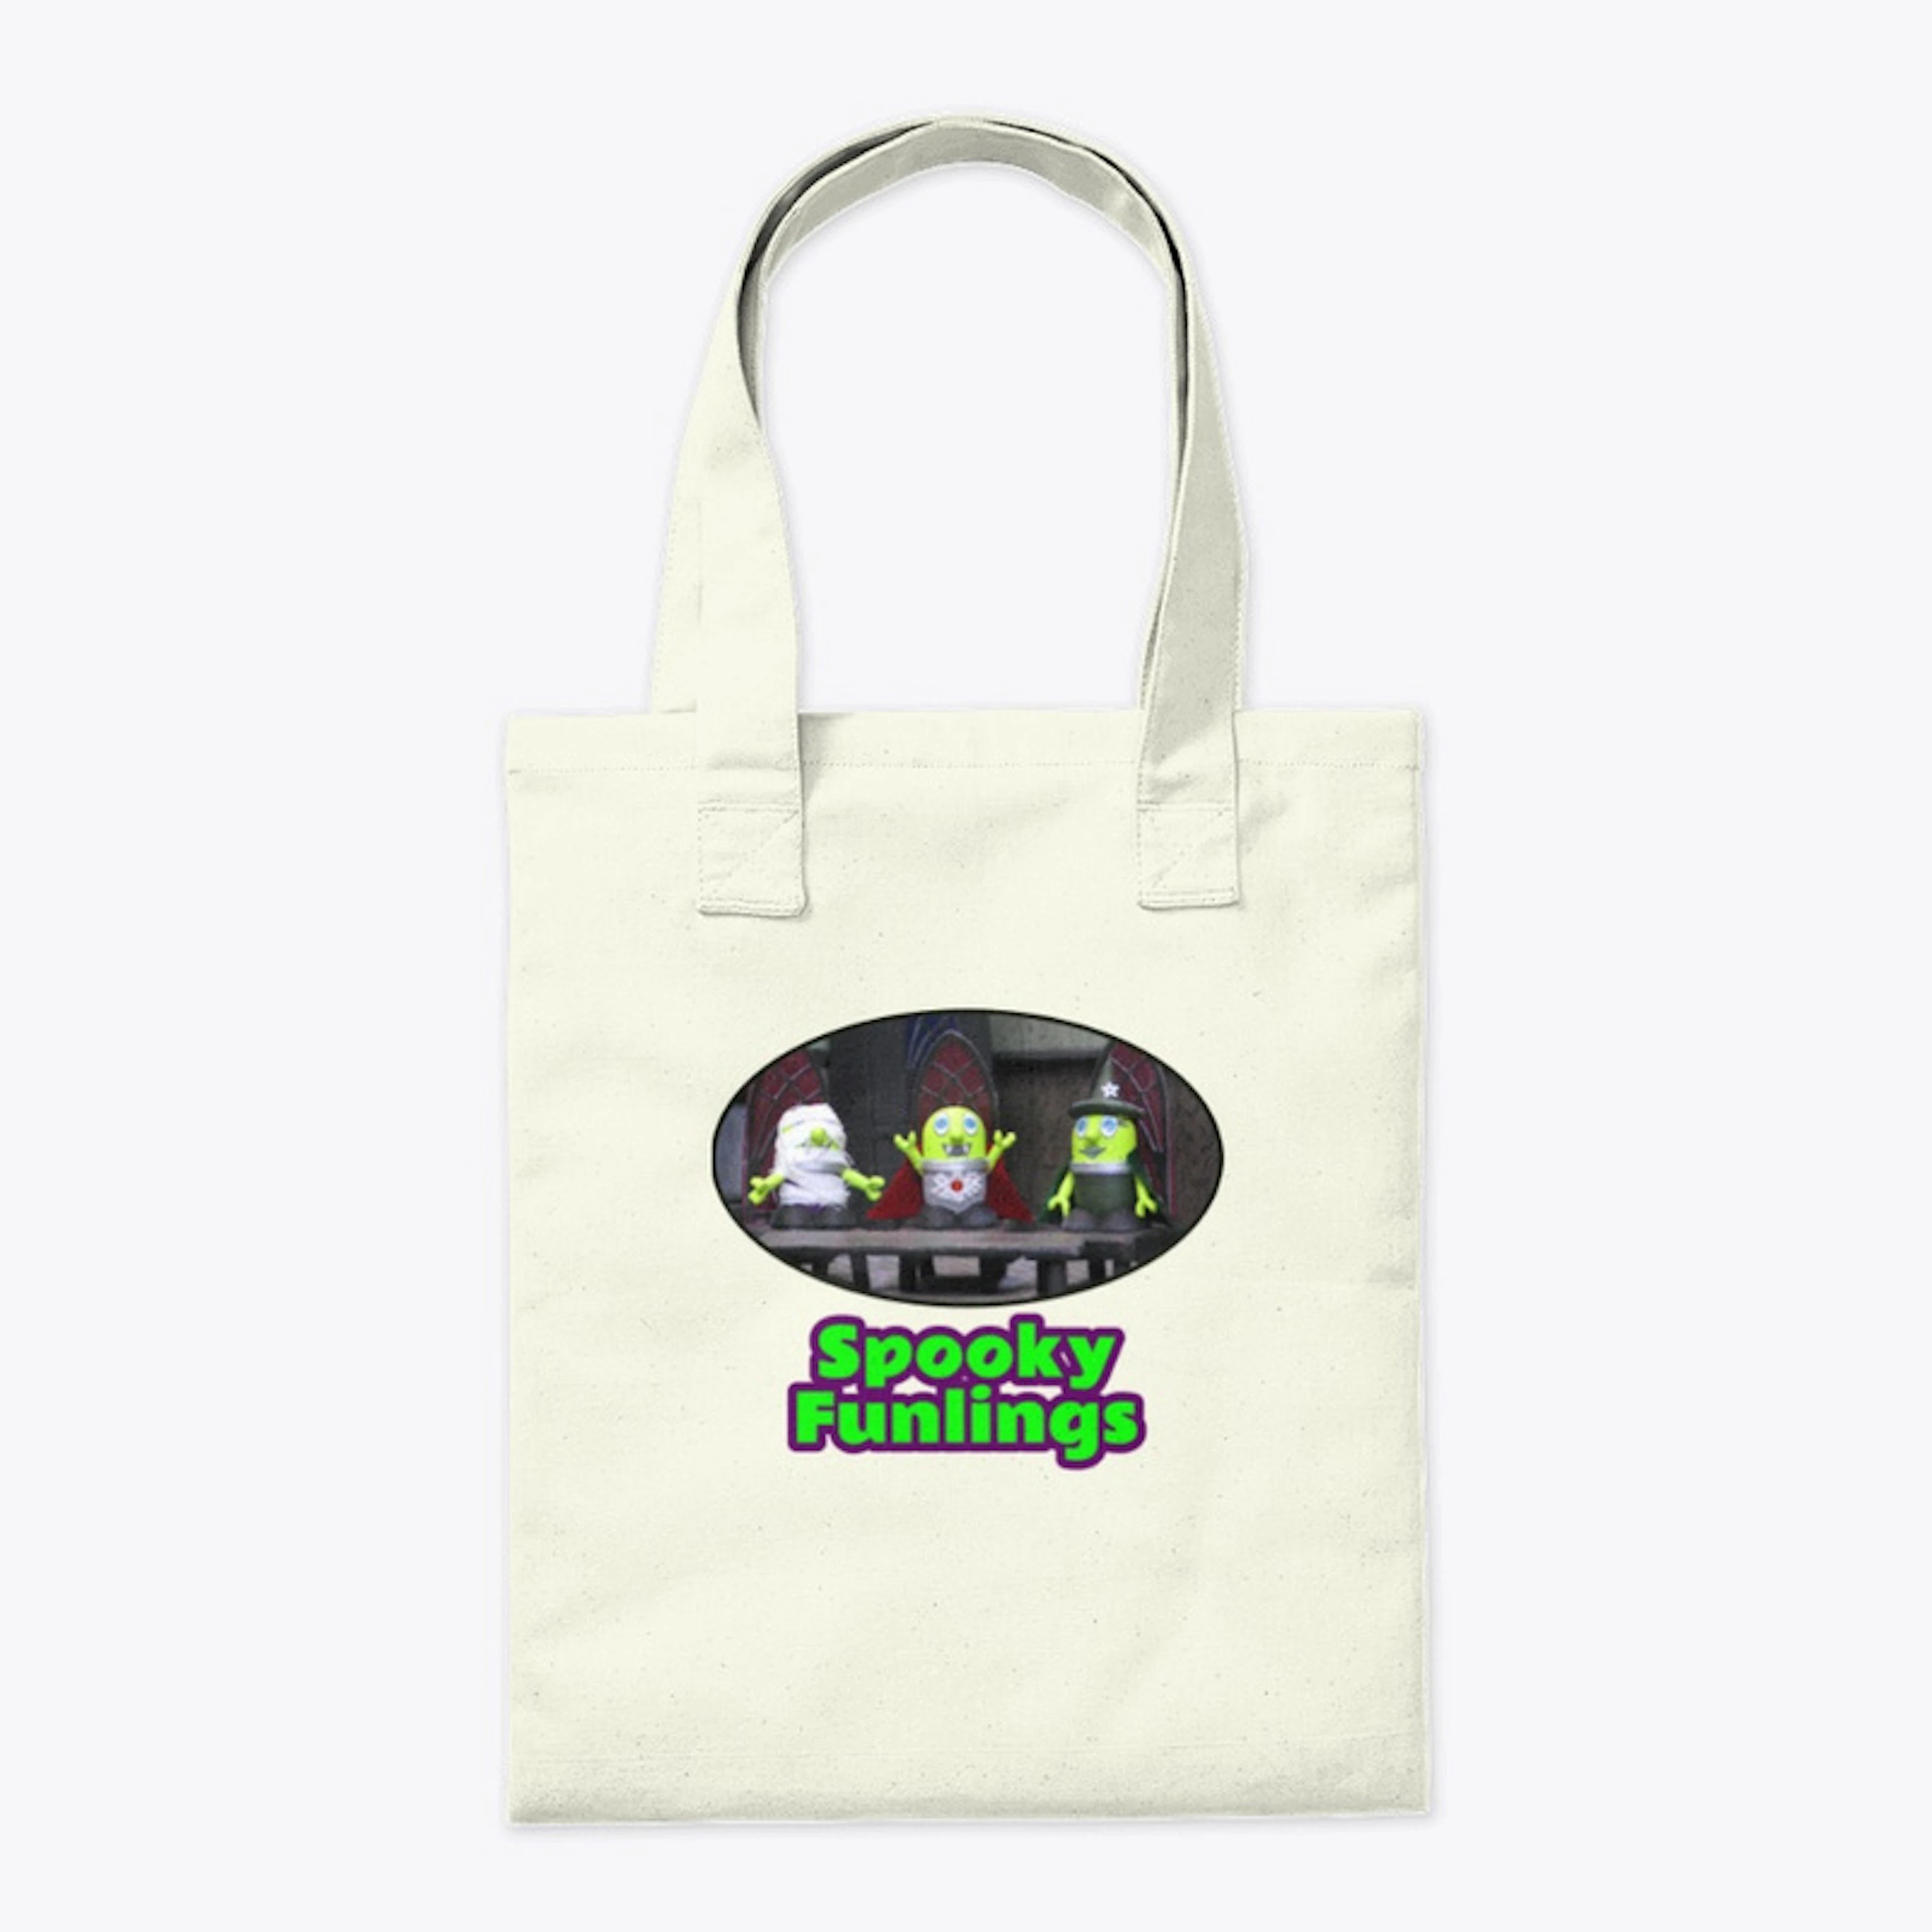 🎃 Trick or Treat Bag Spooky Mansion 🎃